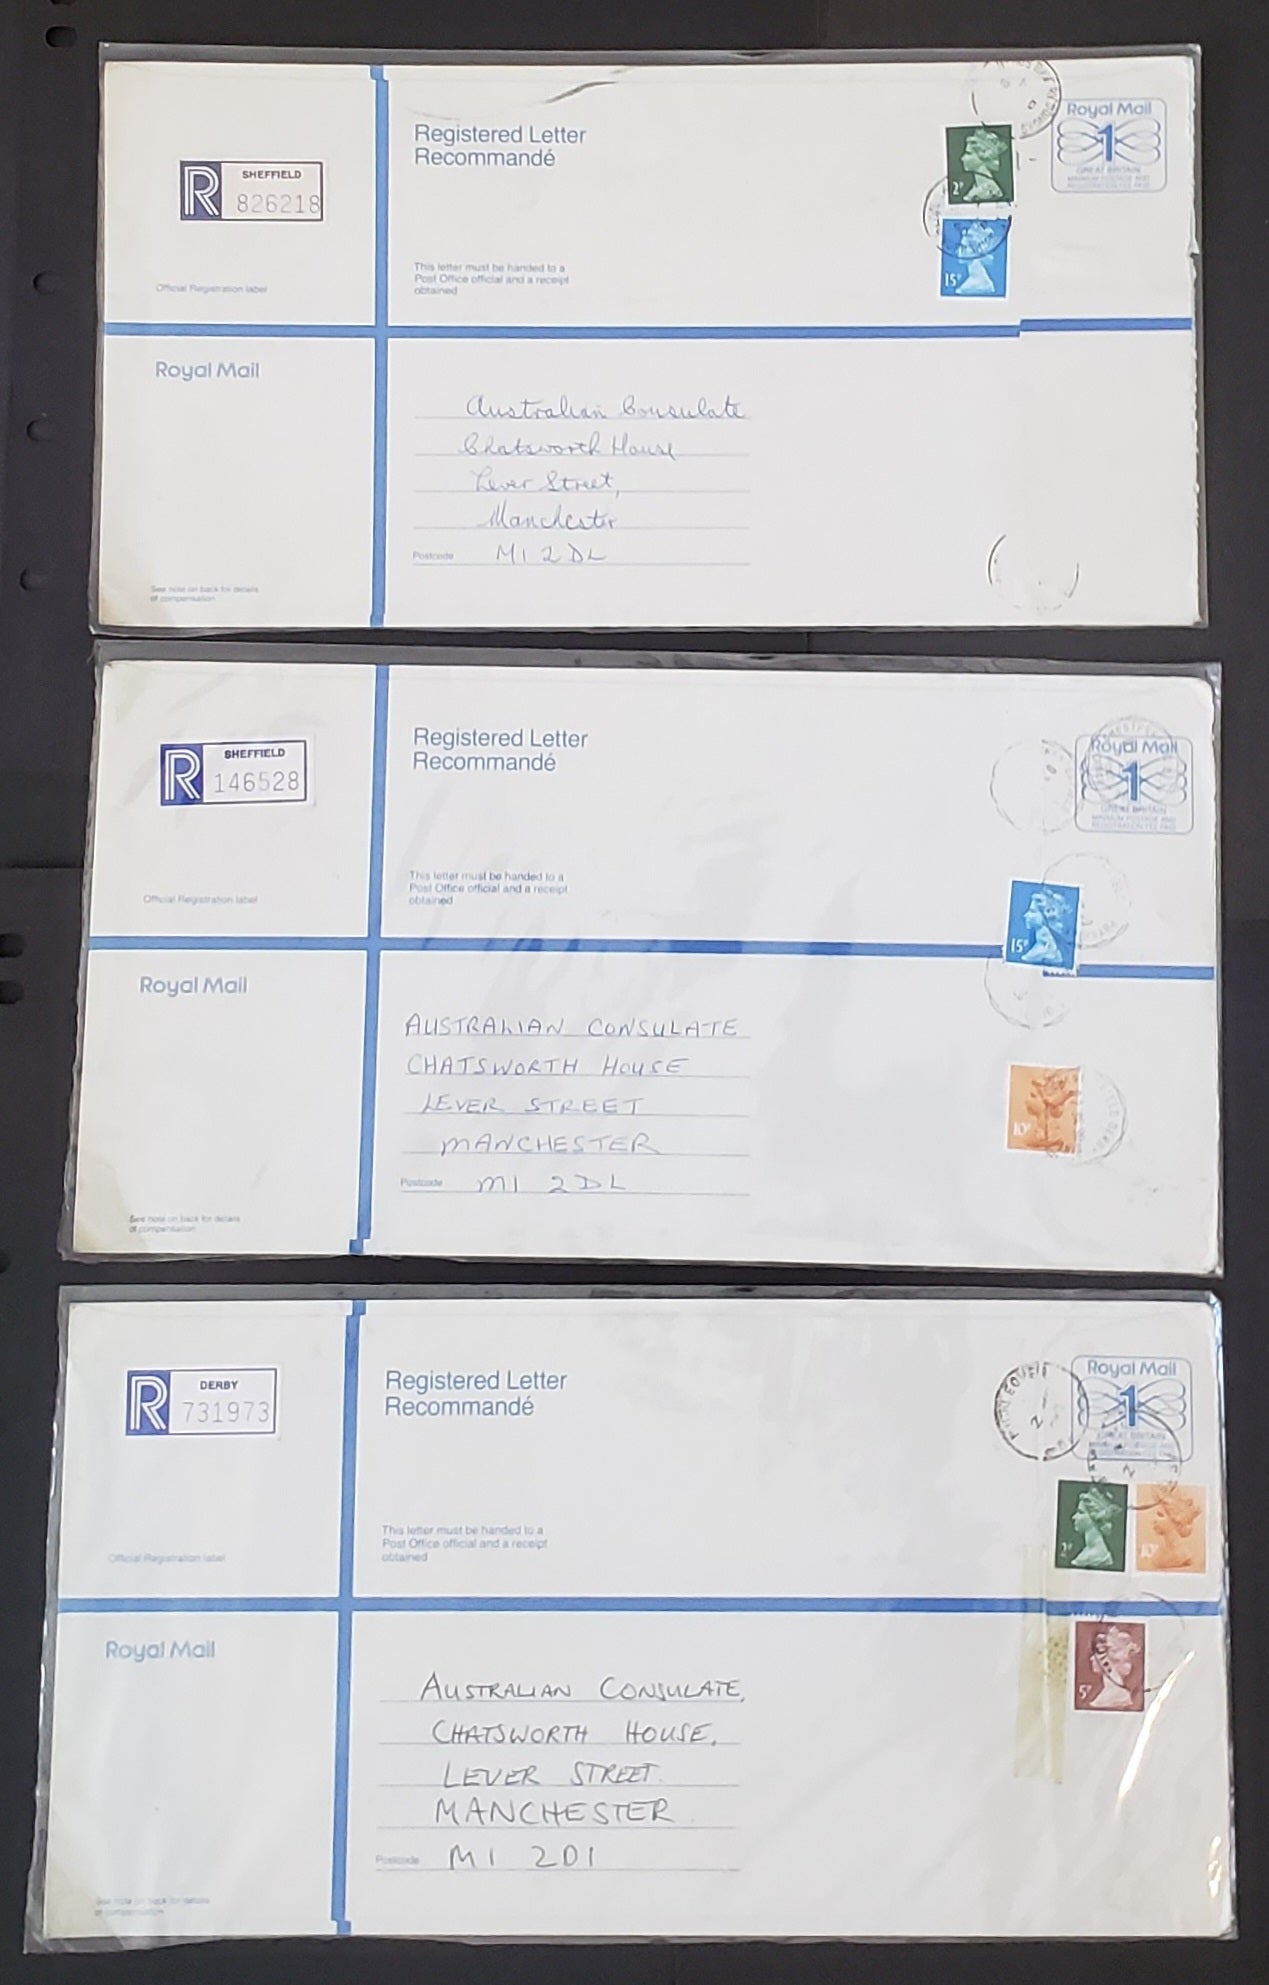 Lot 341 Great Britain 1989-1990 Decimal Machin Covers, A Selection of 5 Different Large Format Registered Envelopes, All Uprated With Values From 1p to 23p, All Sent Locally, All Frankings Are Different in Some way, Net. Est. $5.